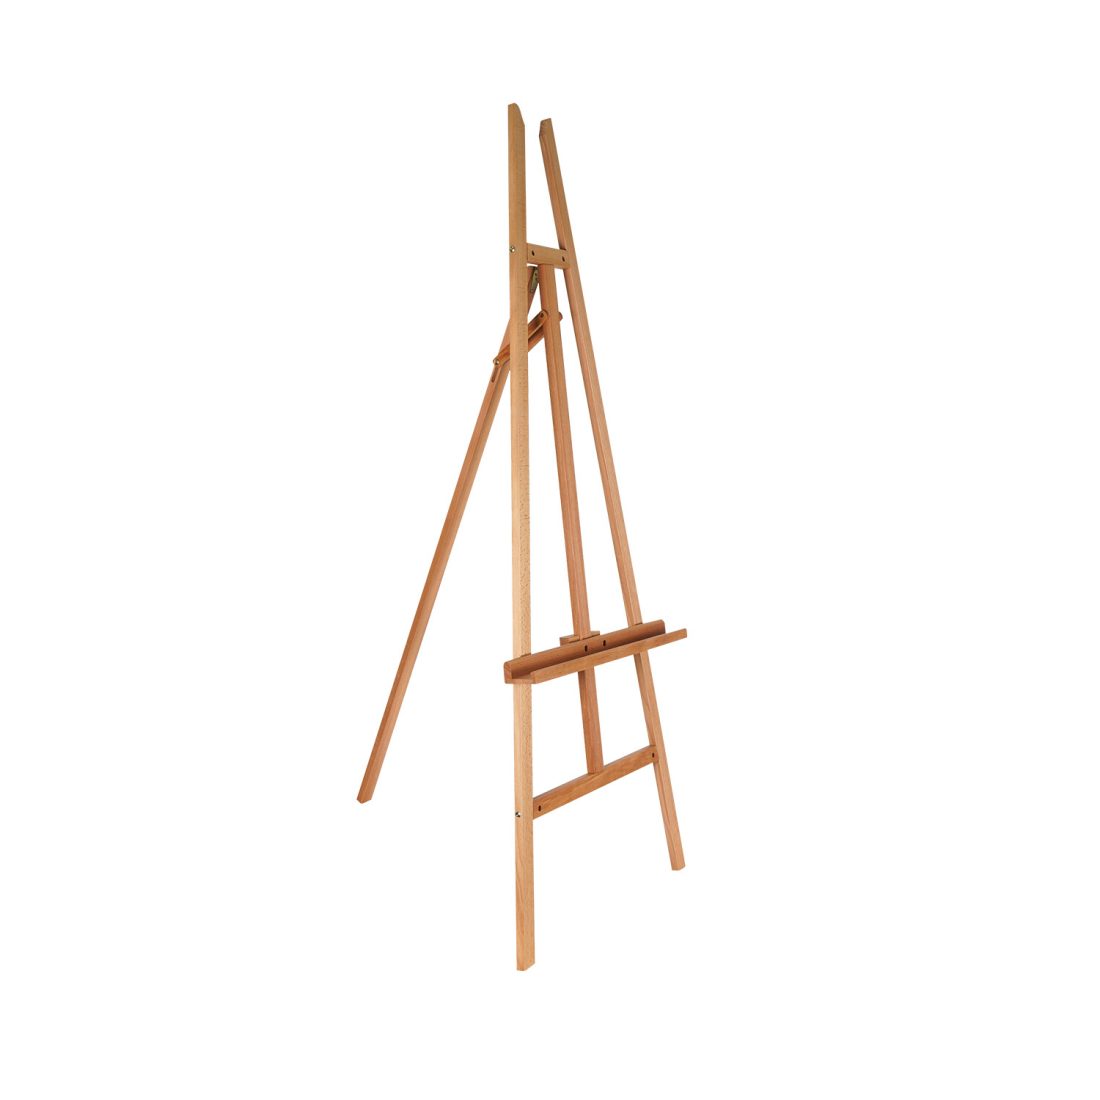 STARHOO 12 Inch Tabletop Easel for Painting Canvas Table Top Easel